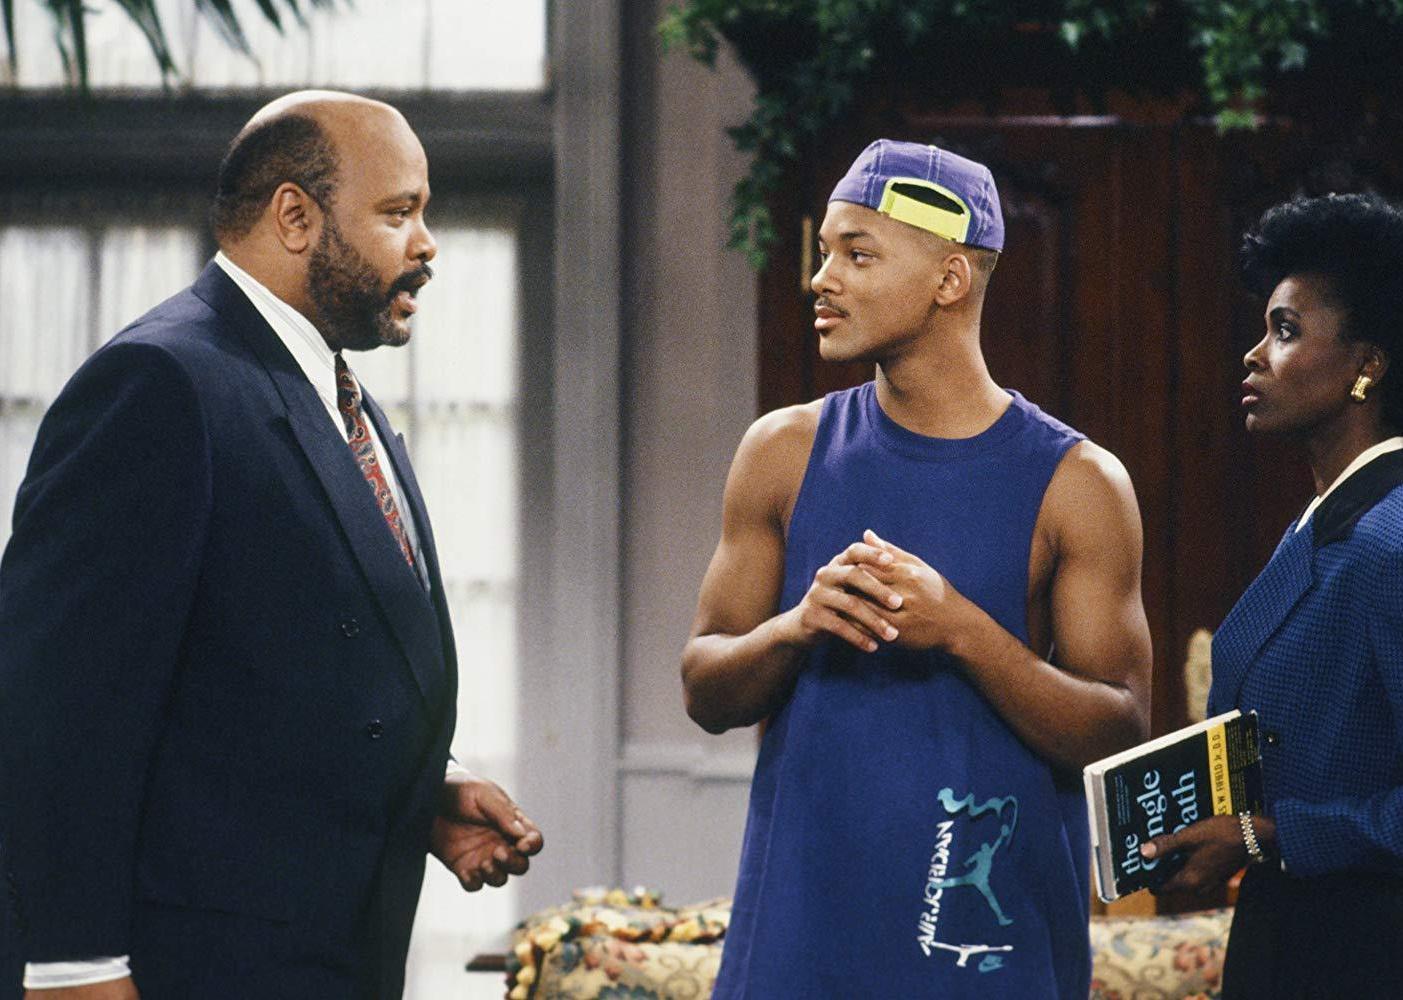 Actors in an episode of ‘The Fresh Prince of Bel-Air’.